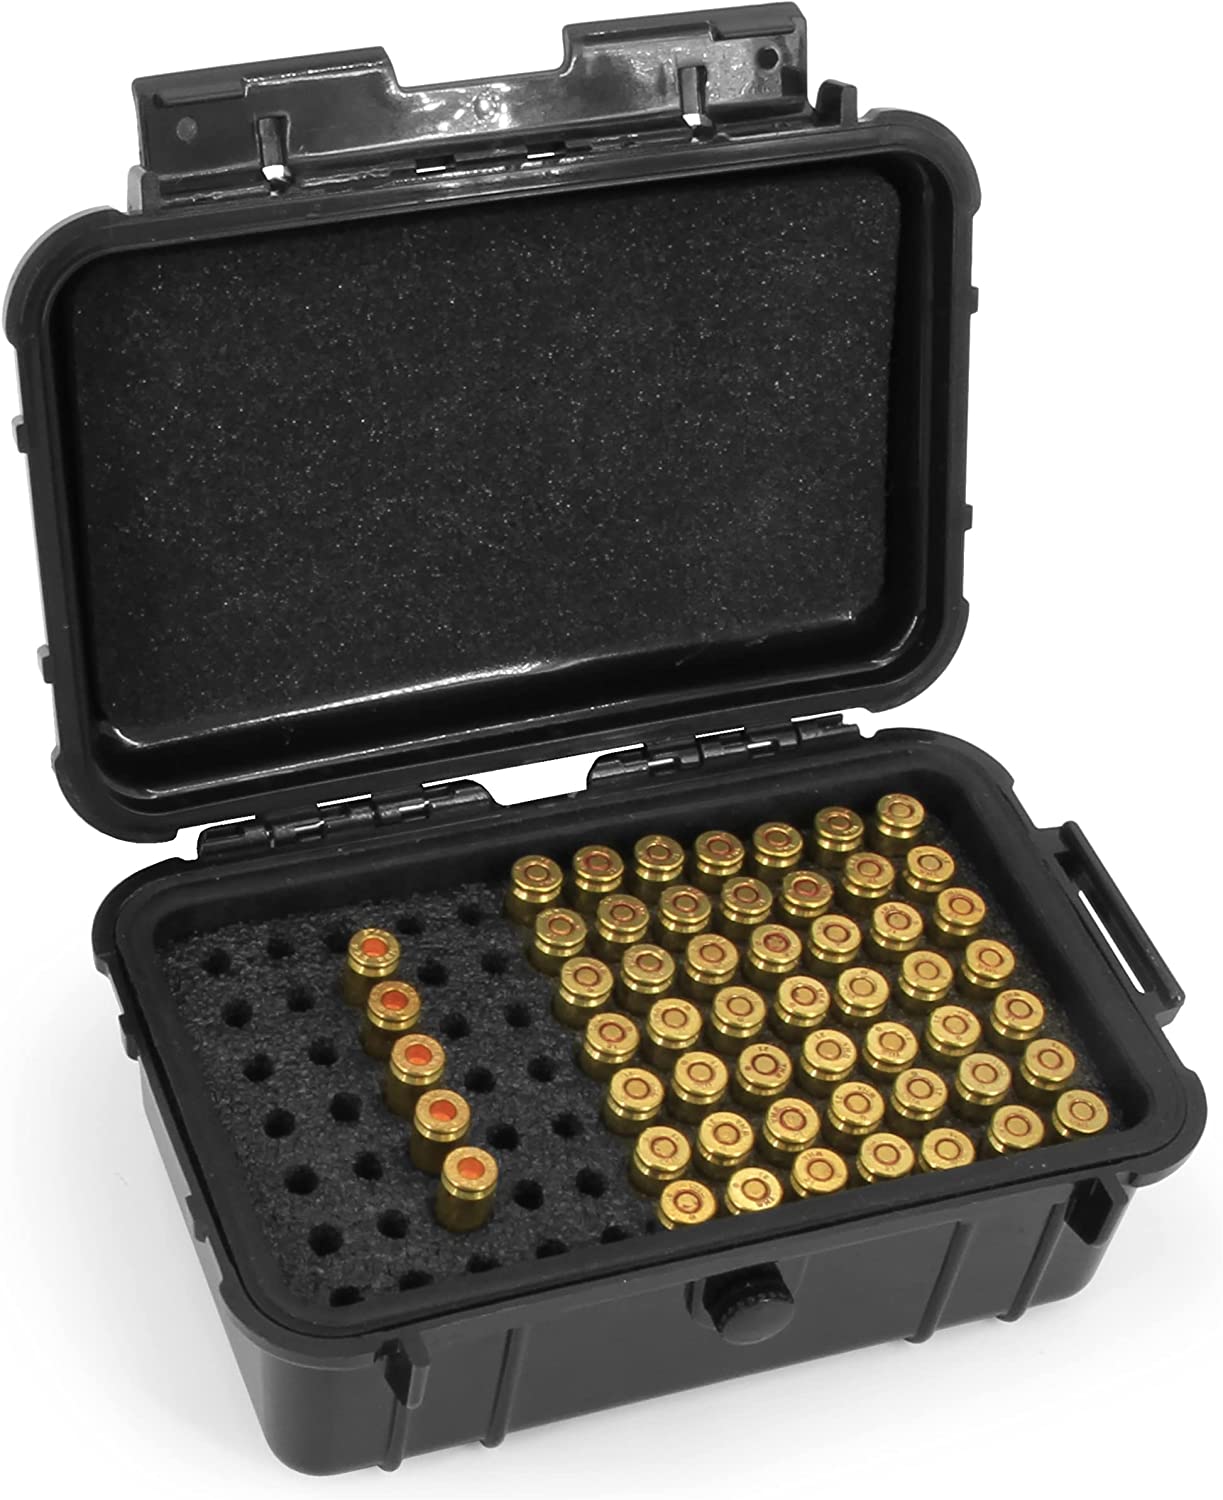 CASEMATIX Hard Shell 9mm Ammo Box for 5.56, 223 or 9mm Bullets – 8" Waterproof Airtight 84 Slot Ammo Case with Custom Impact Absorbing Ammo Can Foam, Compact Design Fits in Range Bags or Ammo Boxes